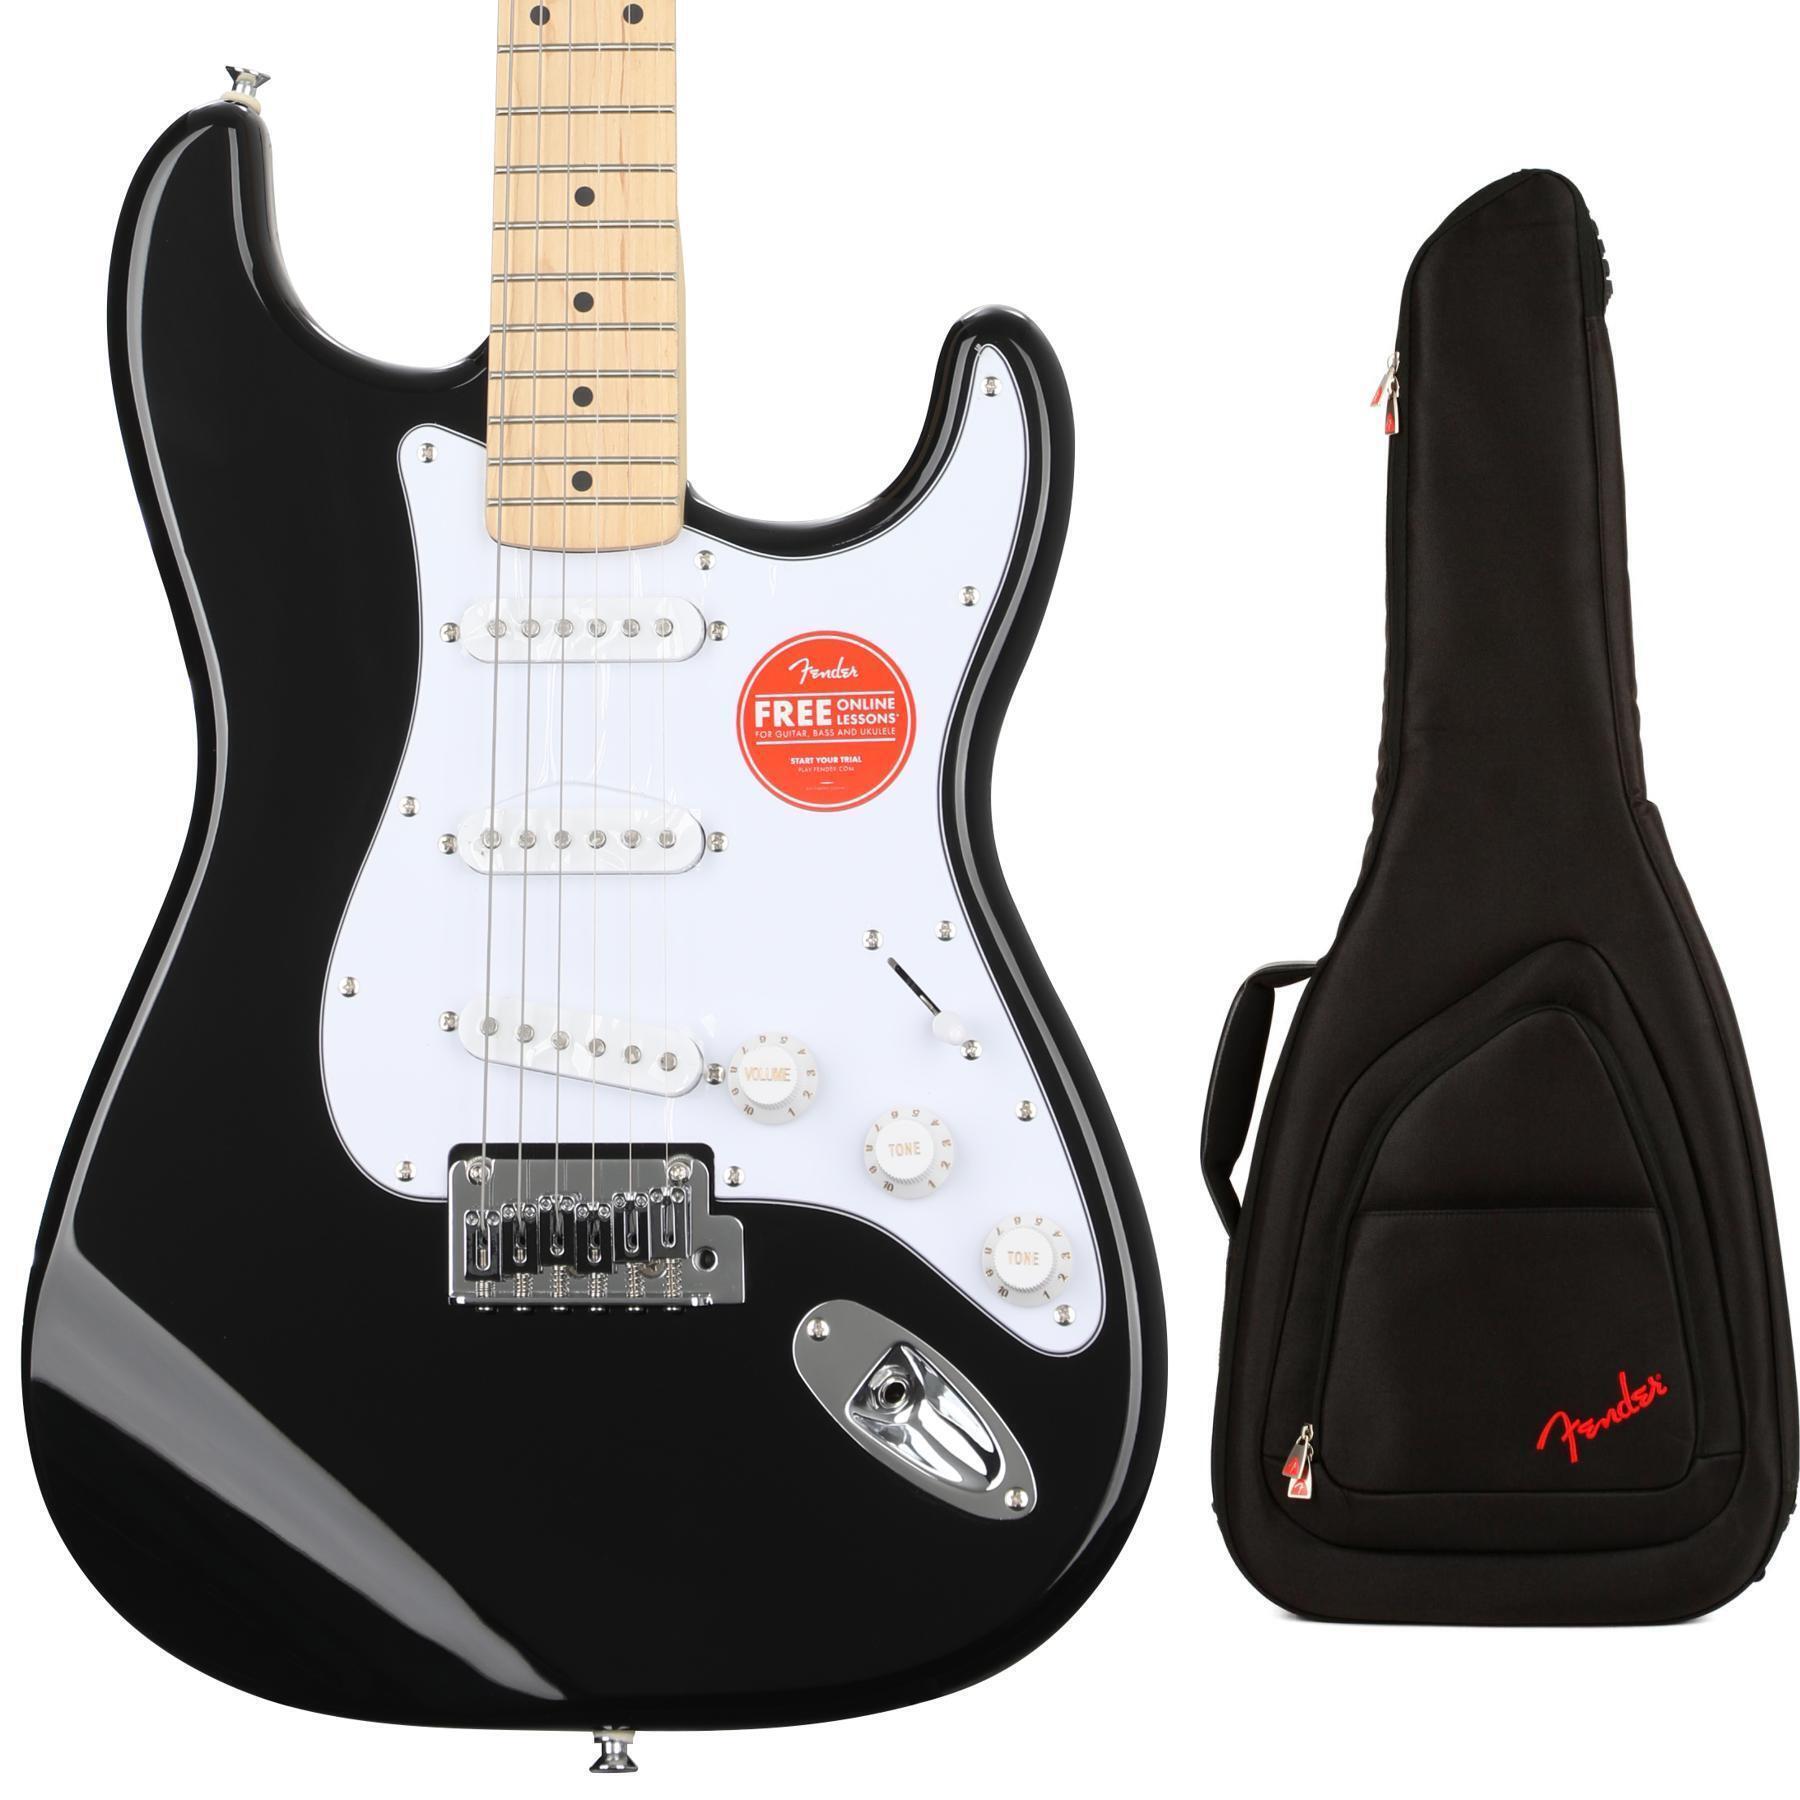 Squier Affinity Series Stratocaster Electric Guitar with Gig Bag - Black  with Maple Fingerboard